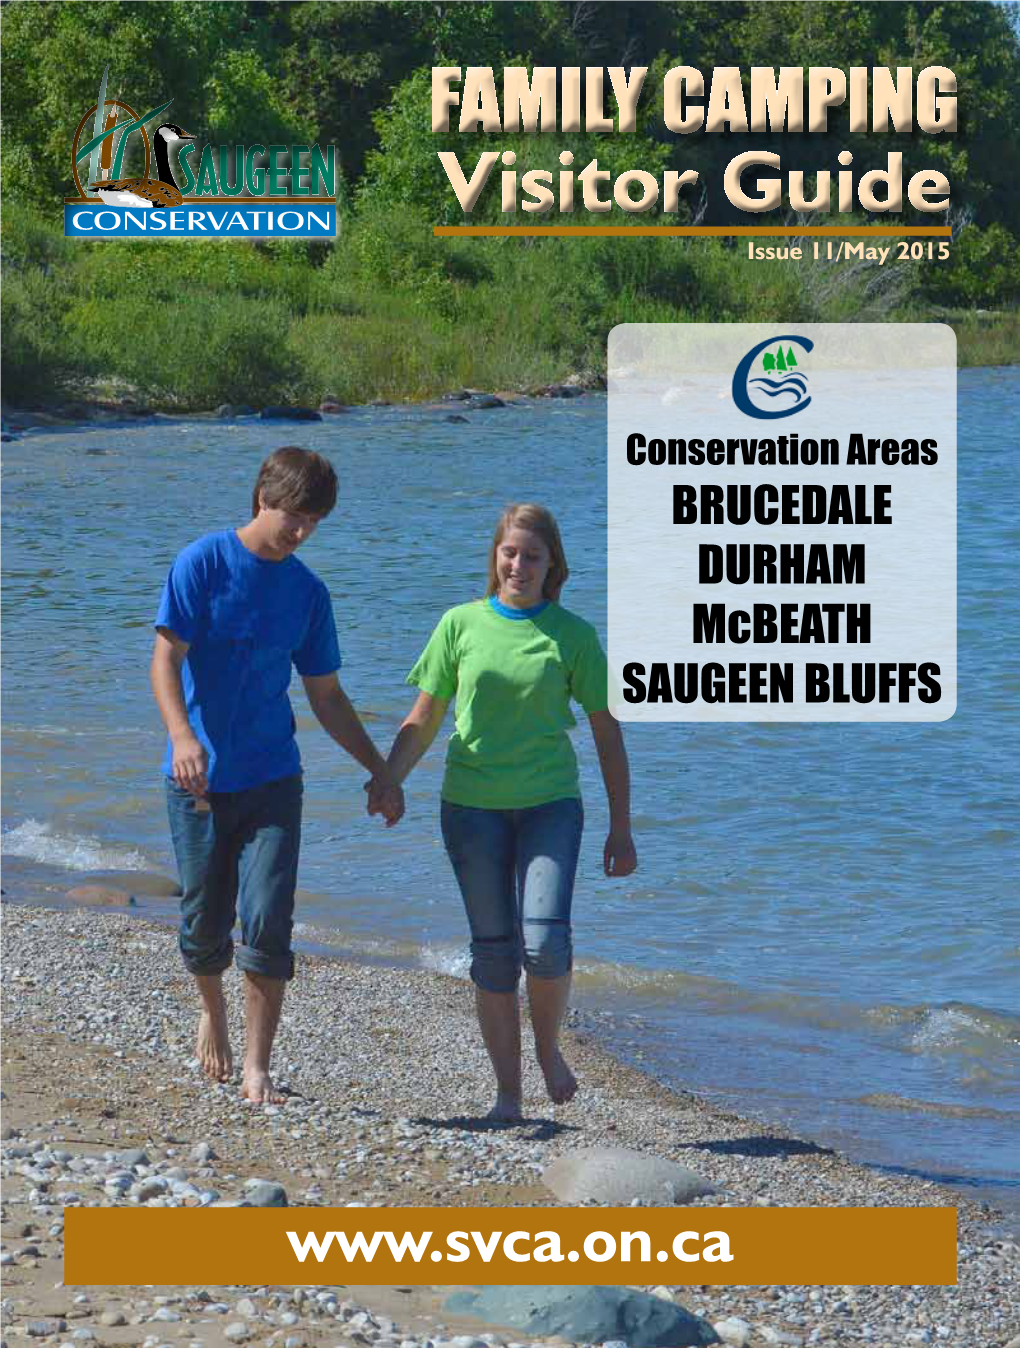 FAMILY CAMPING Visitor Guide Issue 11/May 2015